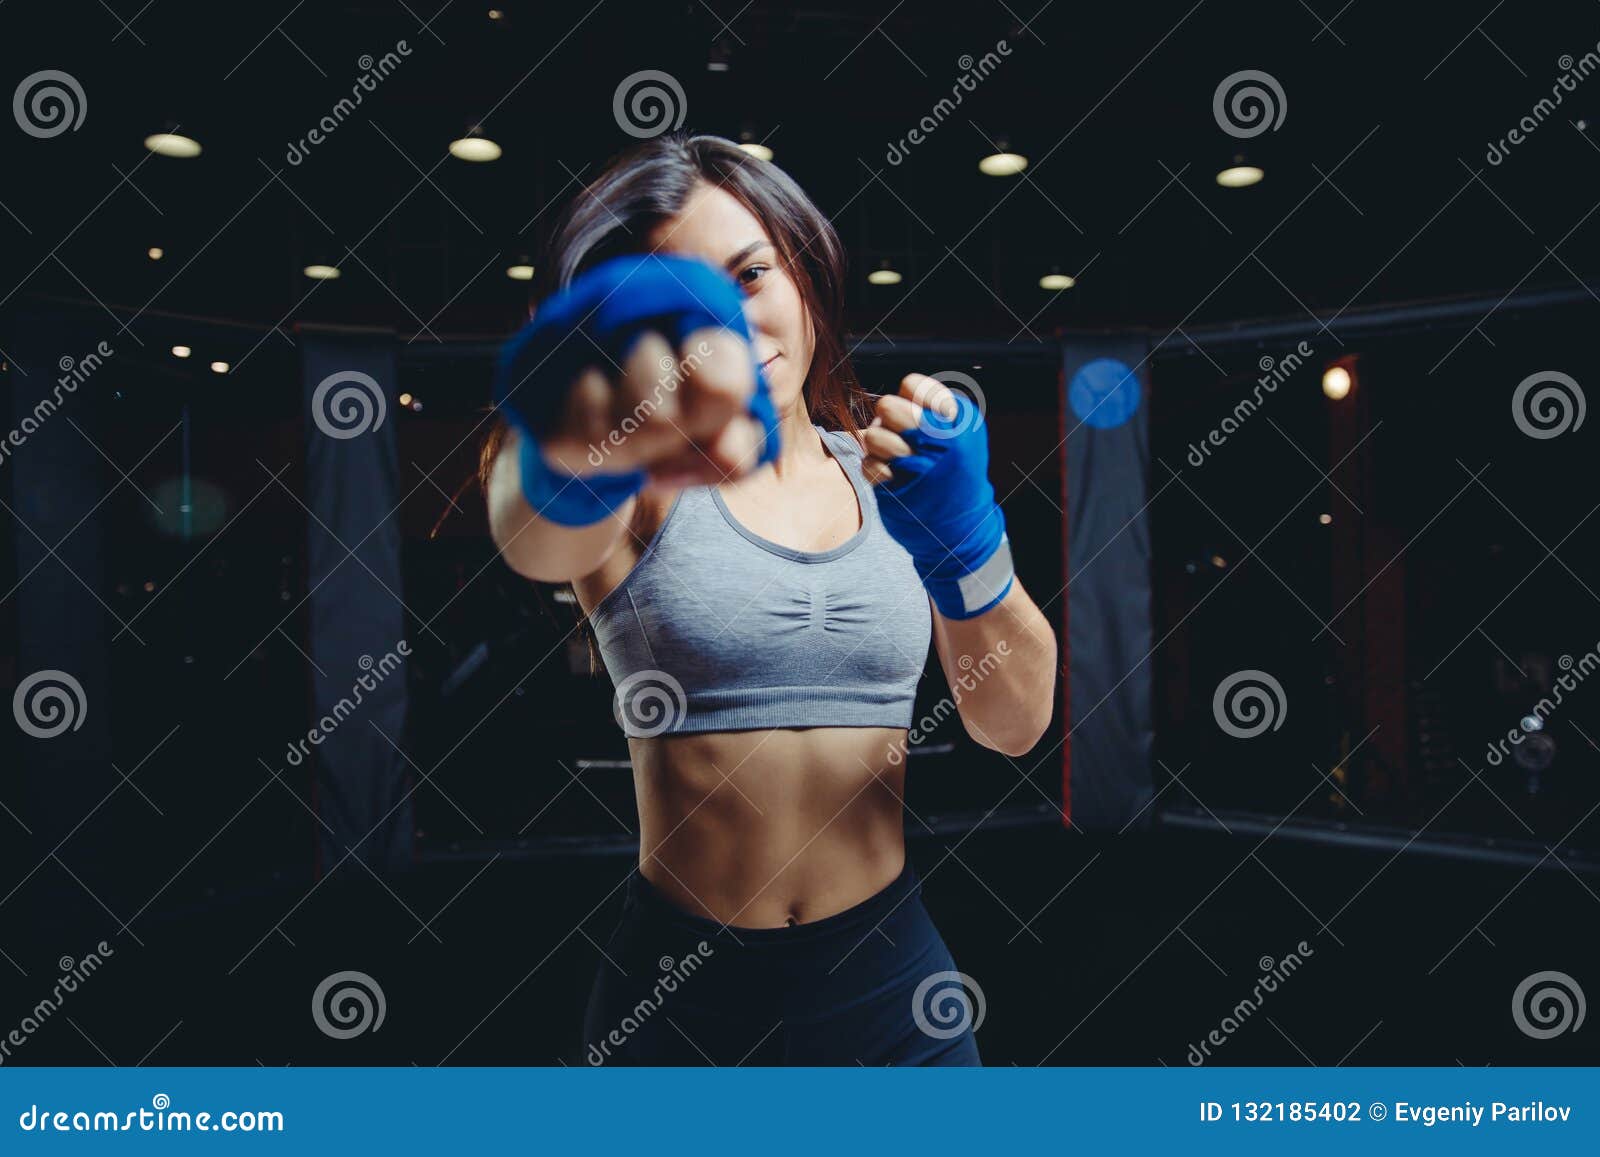 The Top 25 Hottest Female MMA Fighters 2023